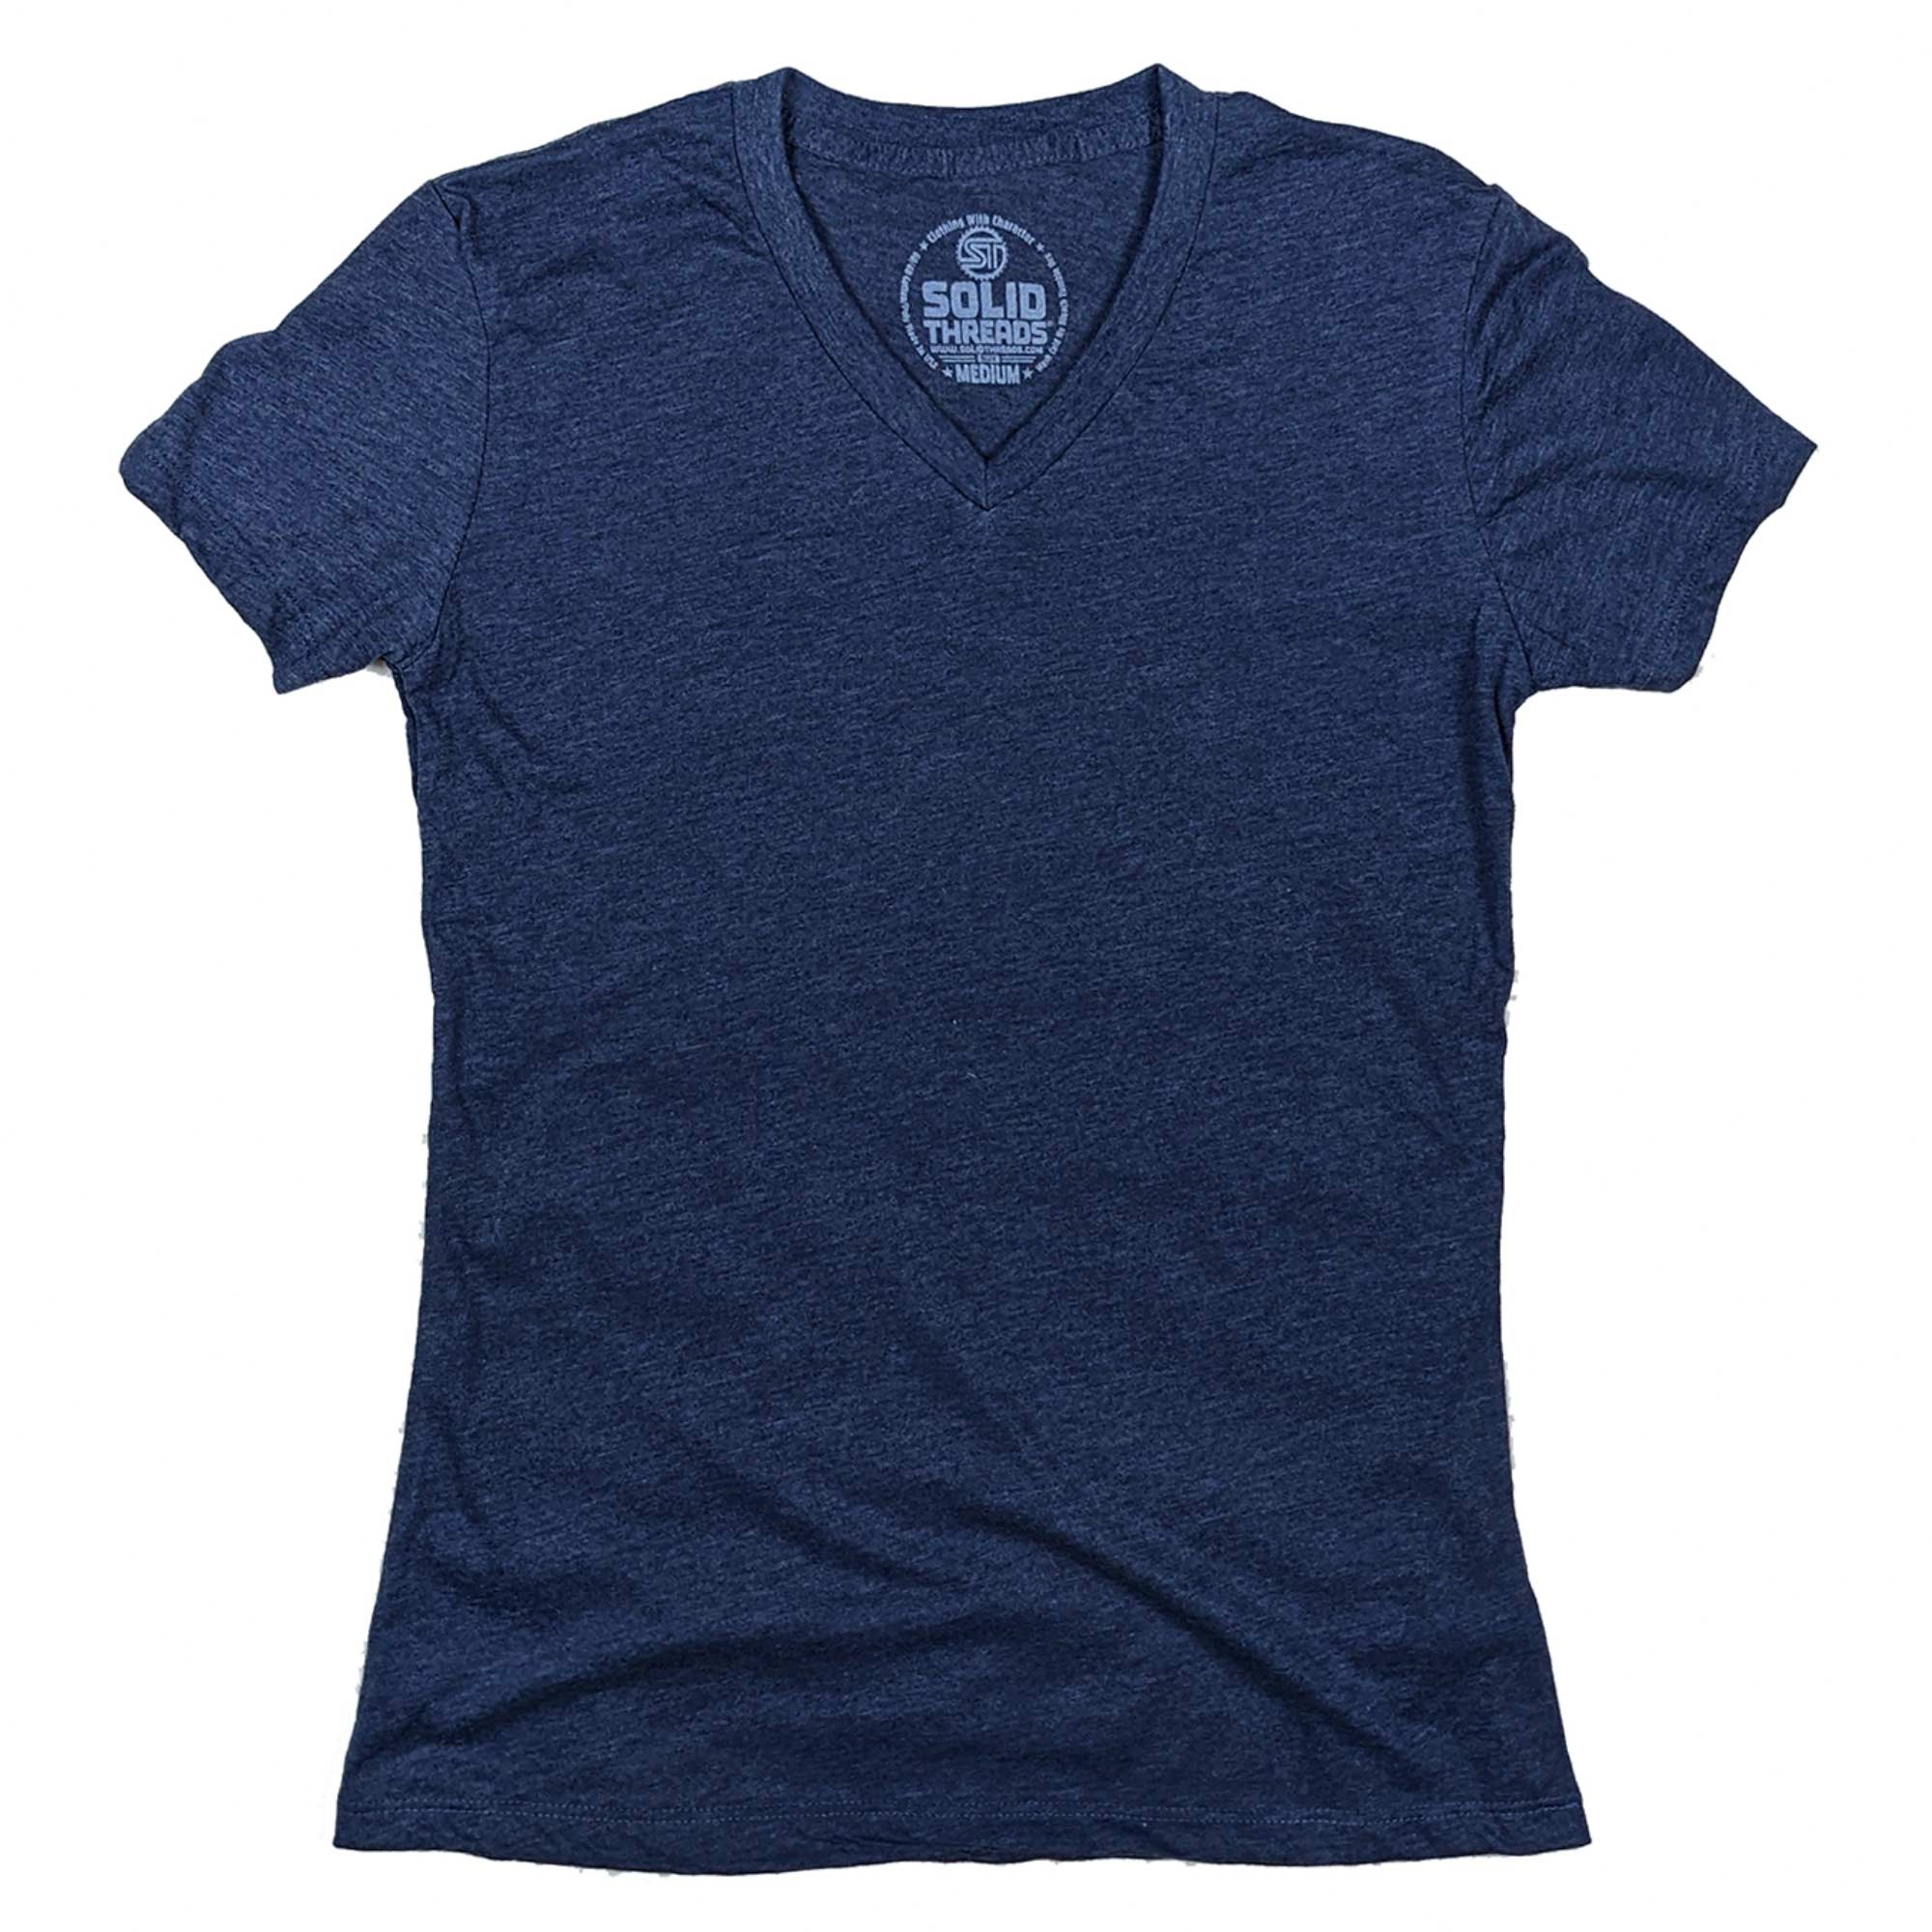 Women's Solid Threads V-Neck Navy T-shirt | Vintage Inspired USA Made Tee